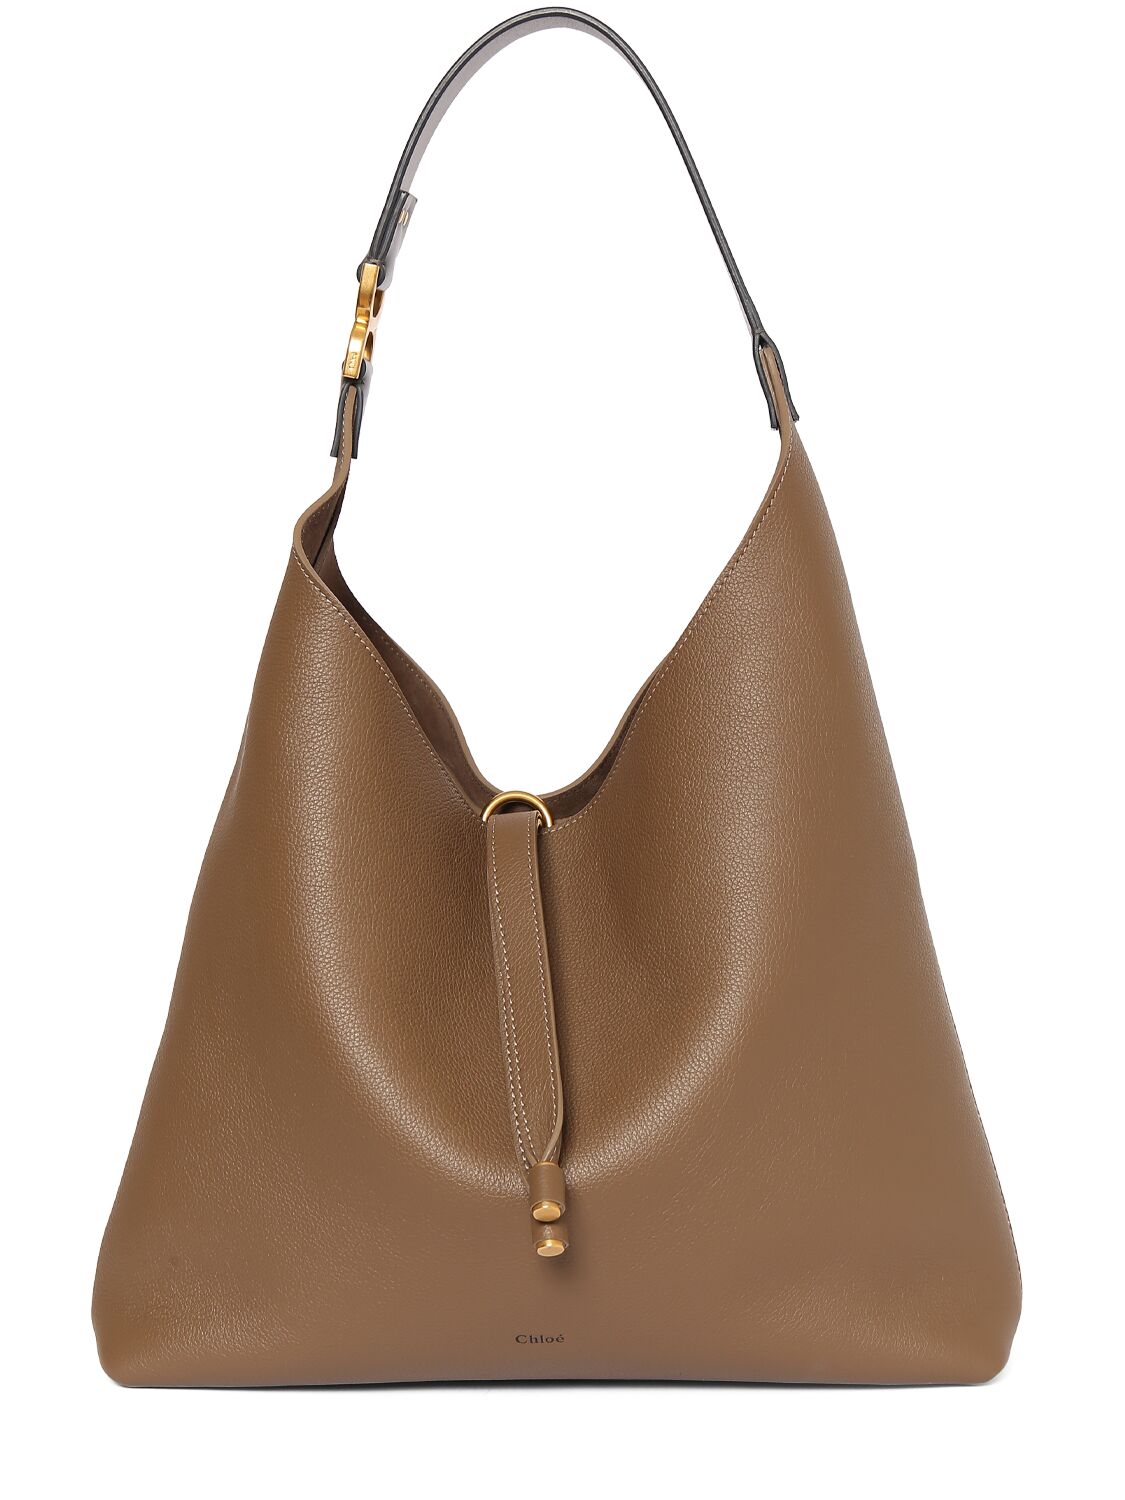 Chloé Marcie Leather Tote Bag In Pottery Brown